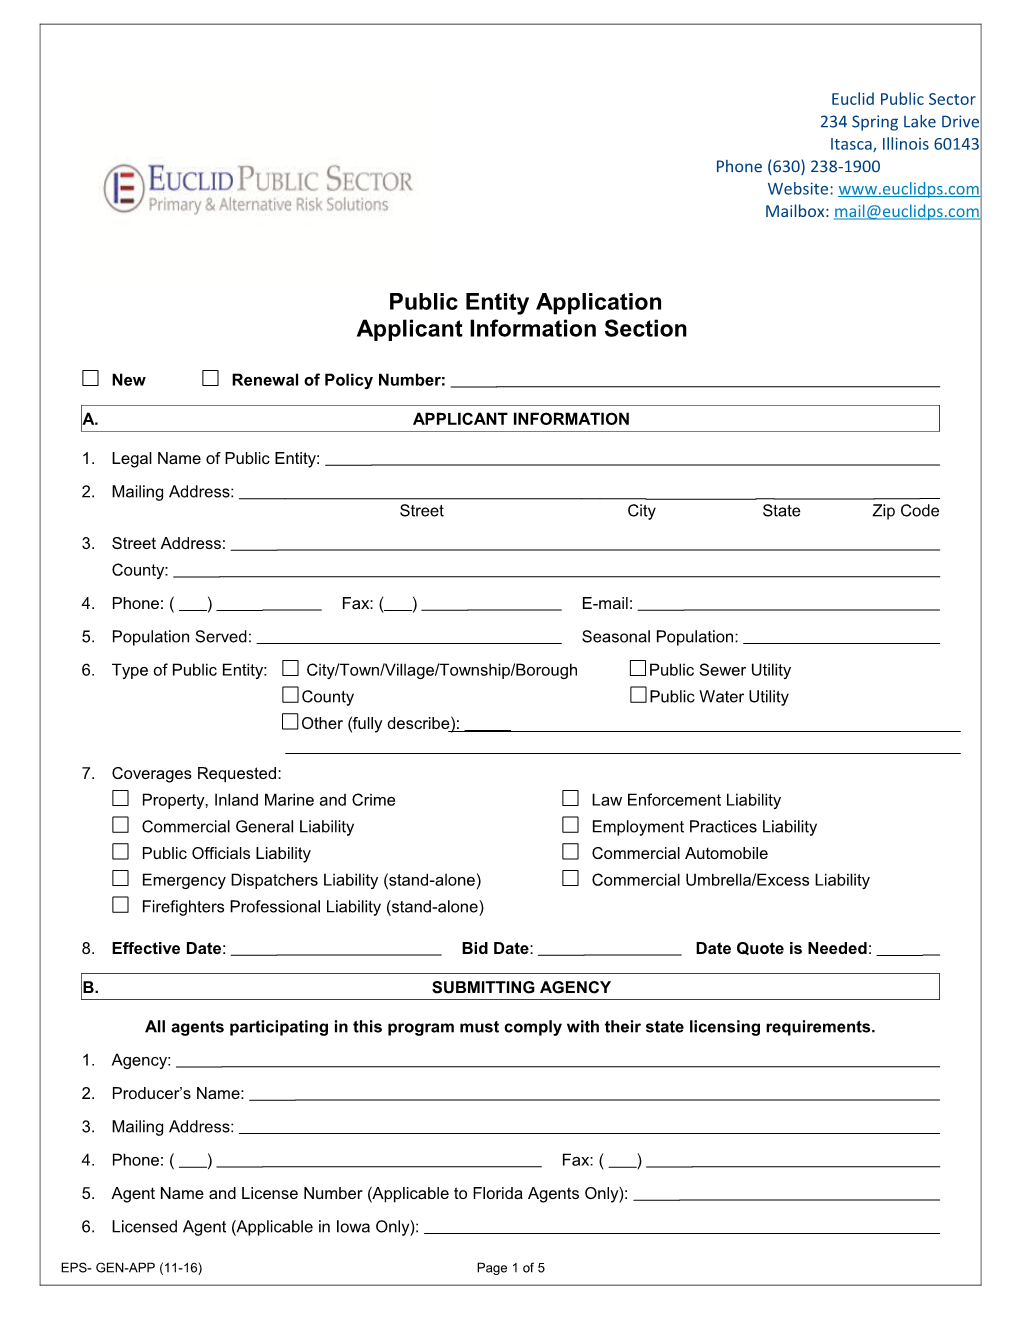 Public Entity Application Applicant Information Section